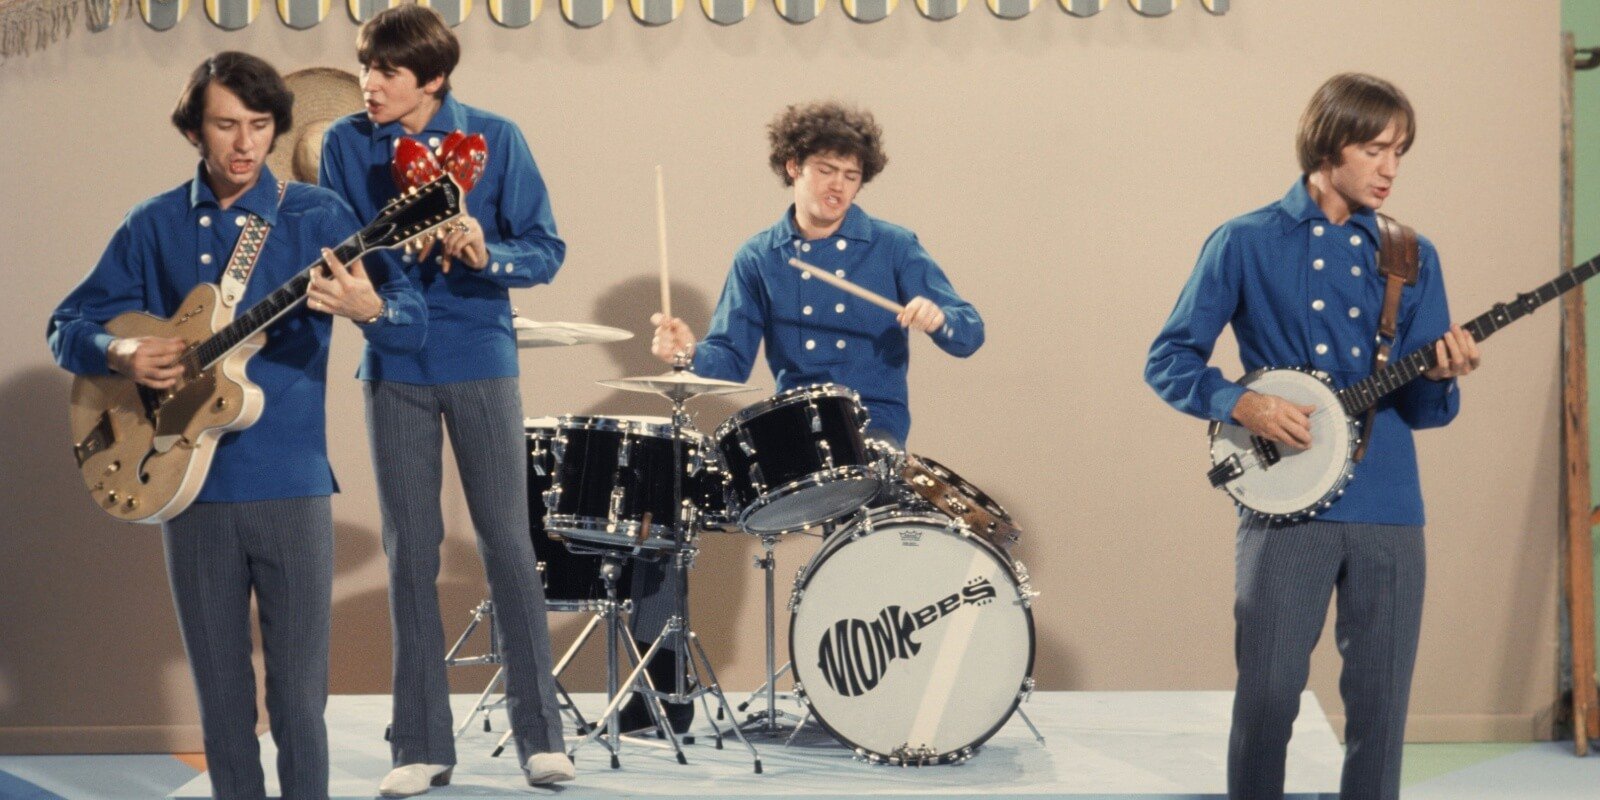 The Monkees members included Mike Nesmith, Davy Jones, Micky Dolenz and Peter Tork.